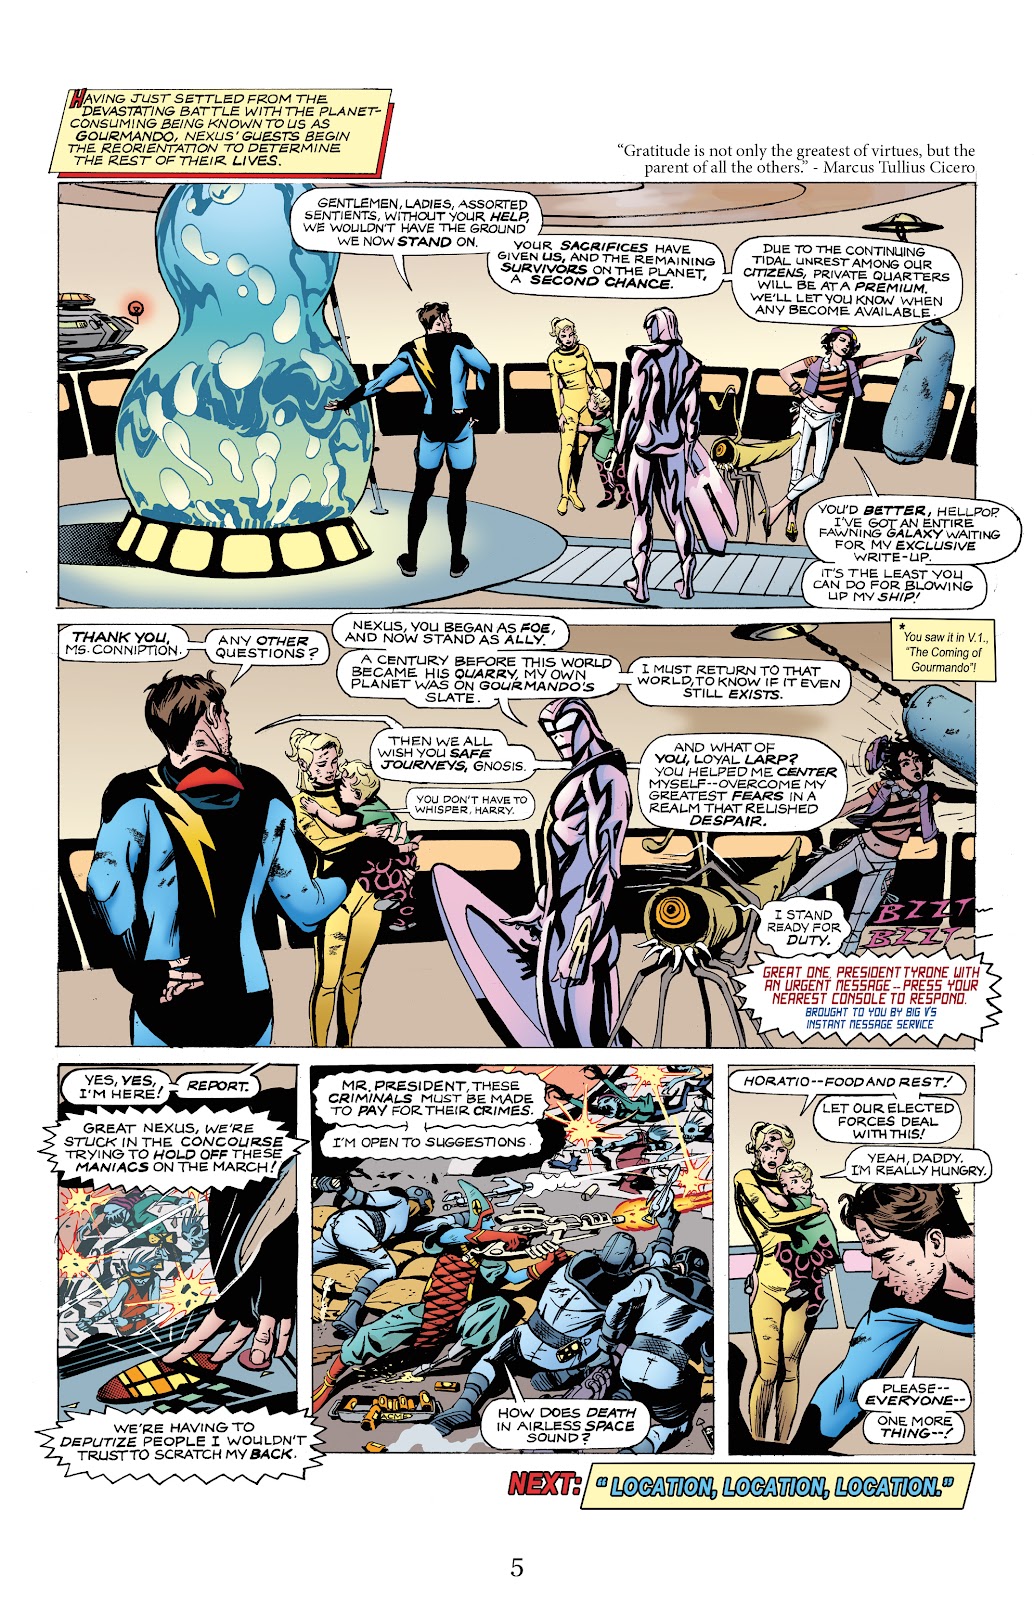 Nexus Newspaper Strips Vol 2: The Battle For Thuneworld issue 1 - Page 7